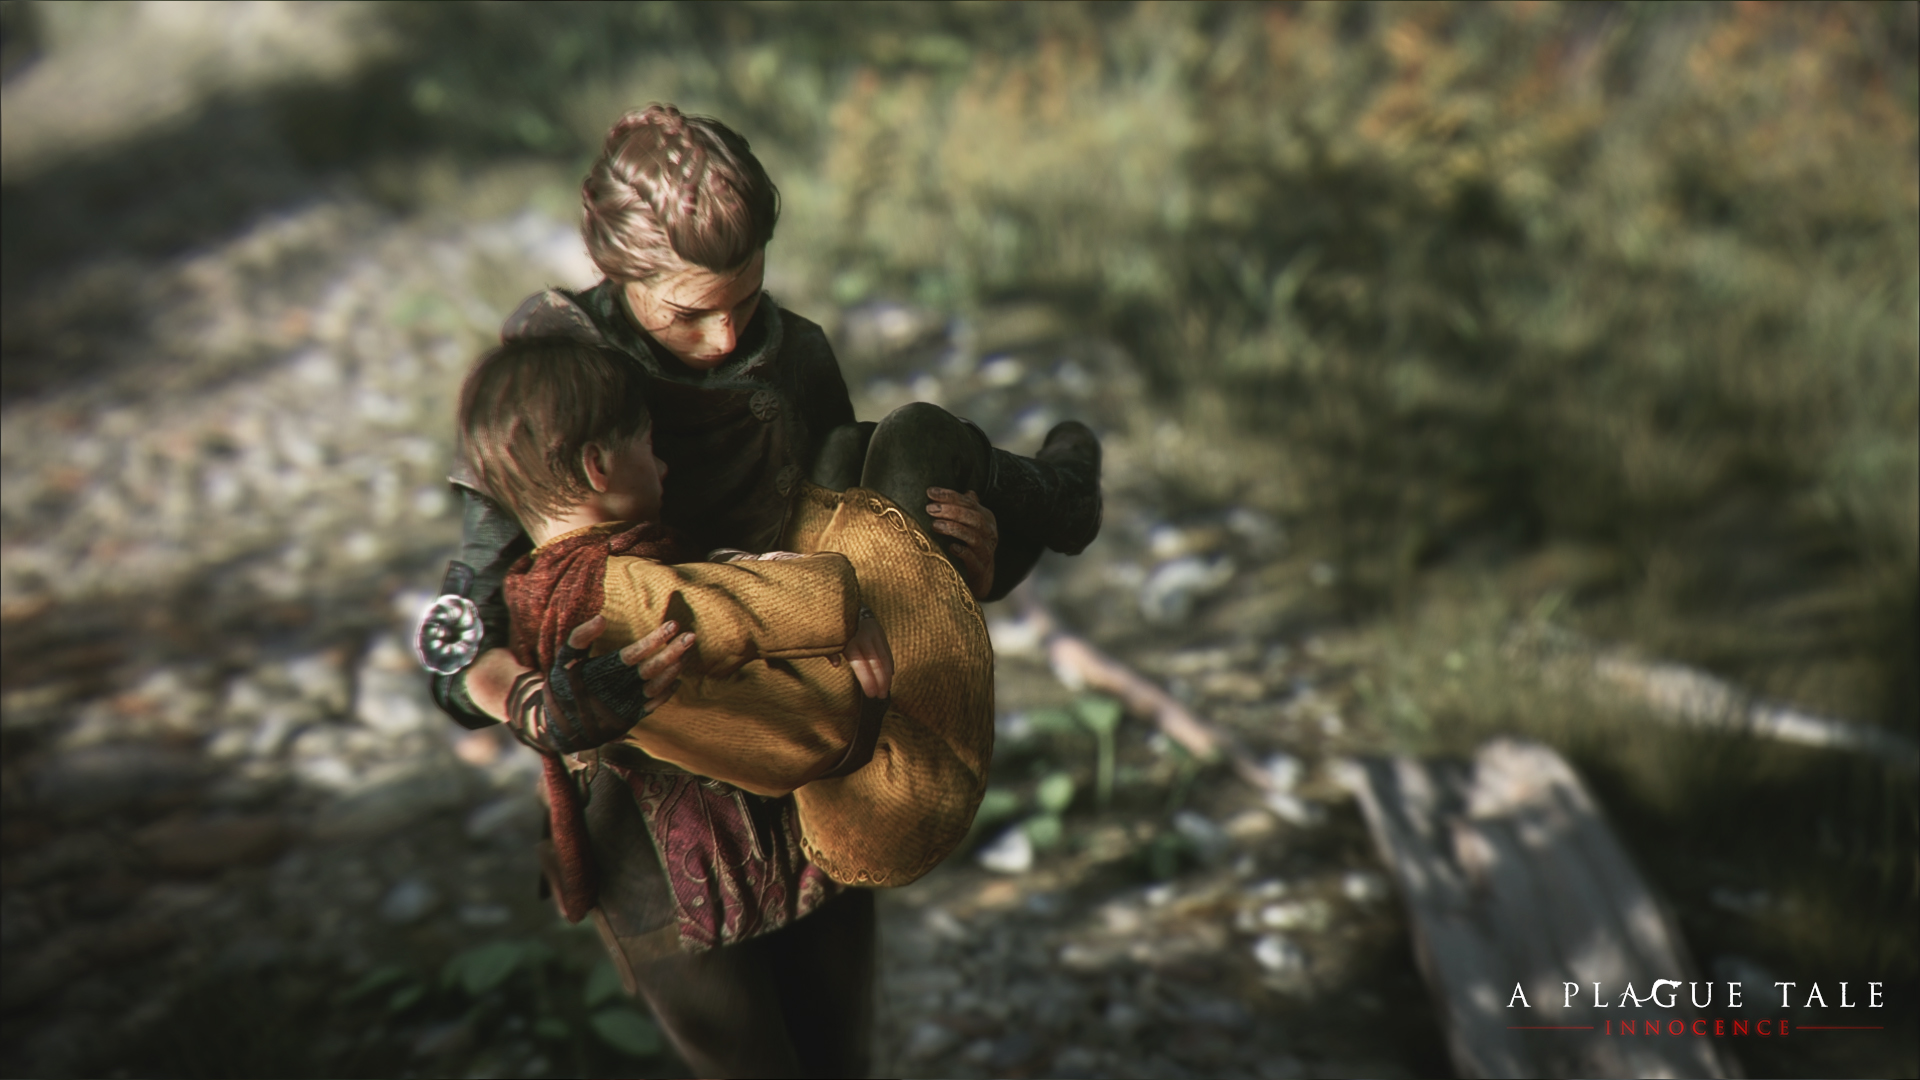 Image from A Plague Tale: Innocence